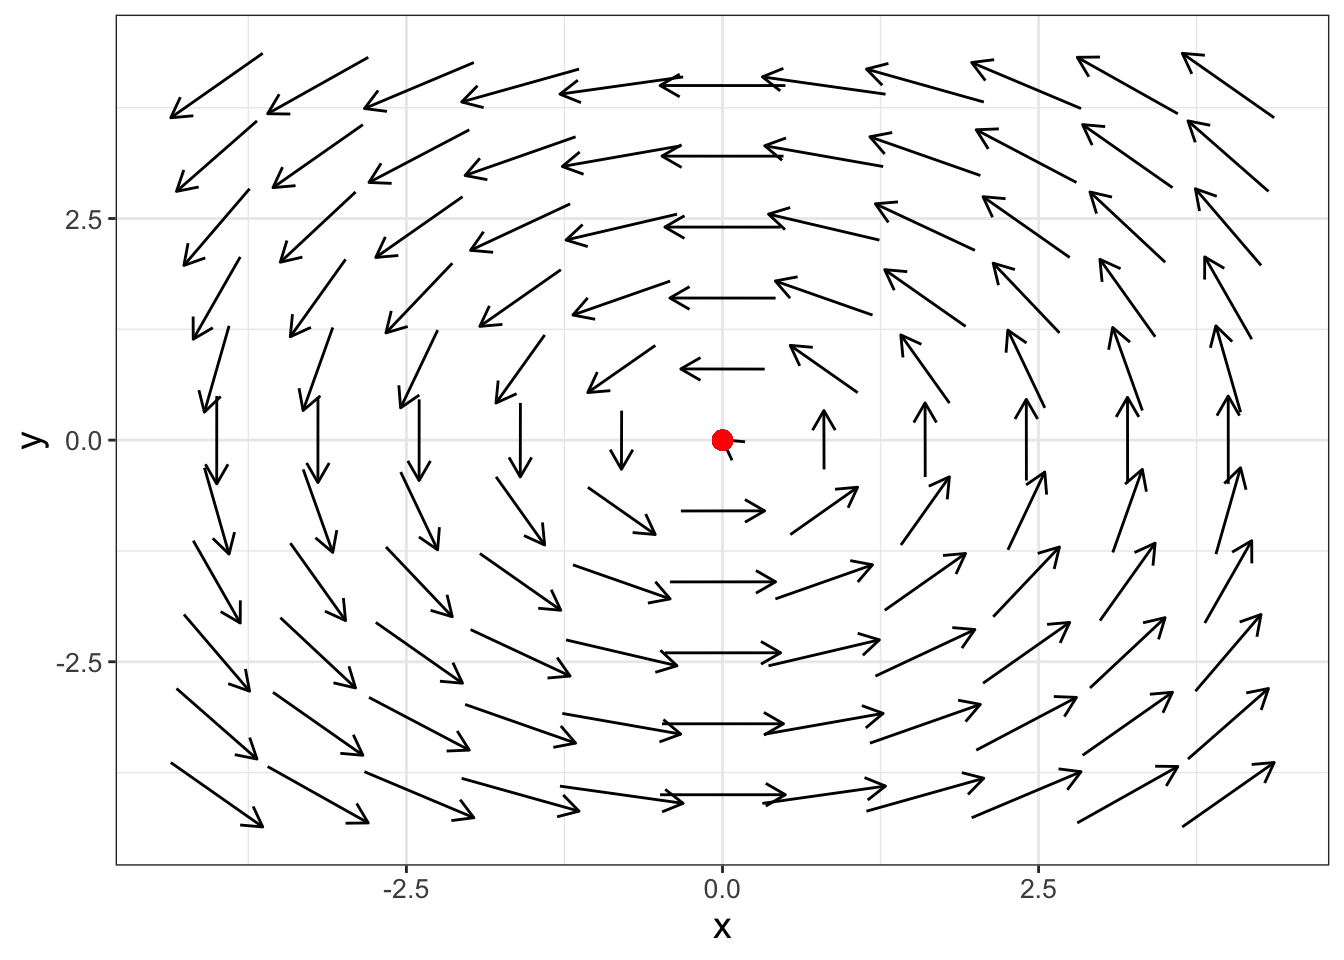 Phase plane for Equation \@ref(eq:center-ex-18), which shows the equilibrium solution is a center.